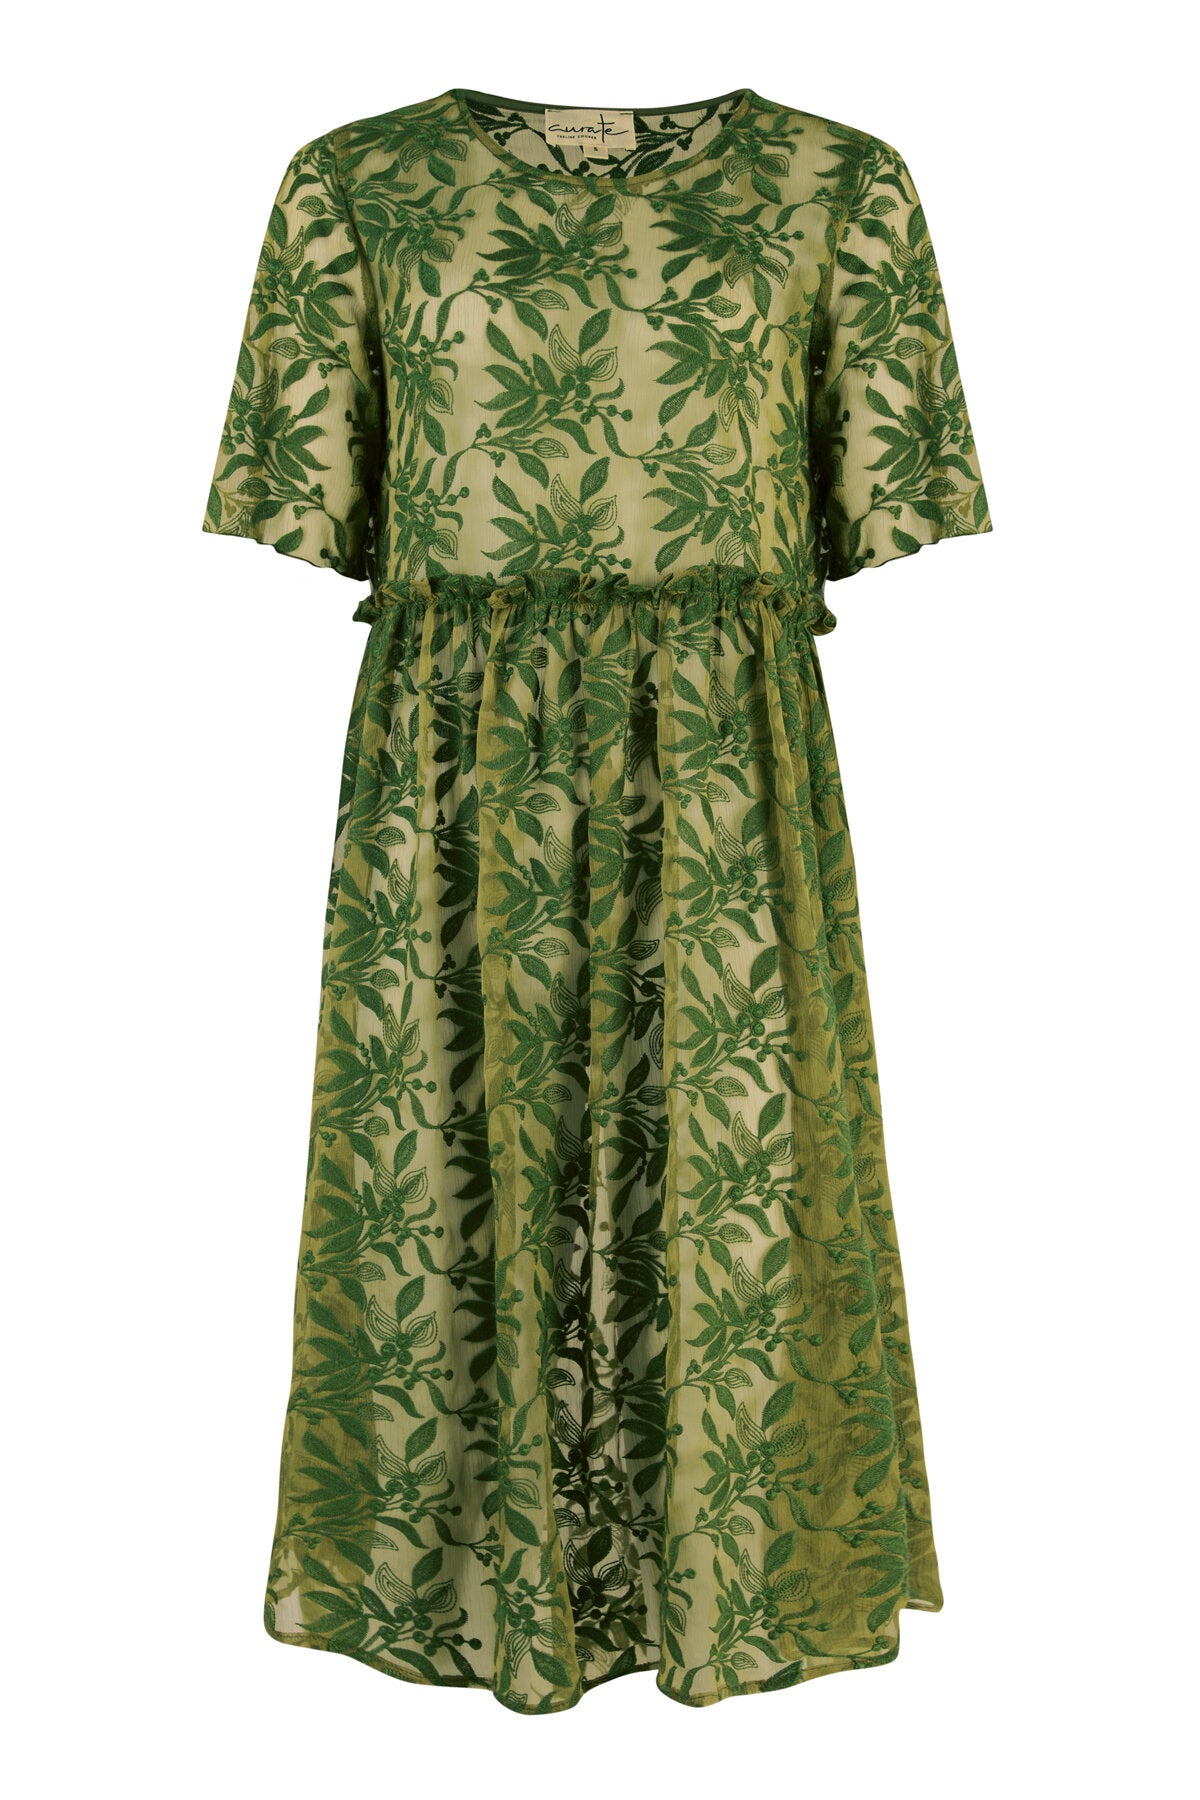 Trelise Cooper - Take The Plunge Dress Forest